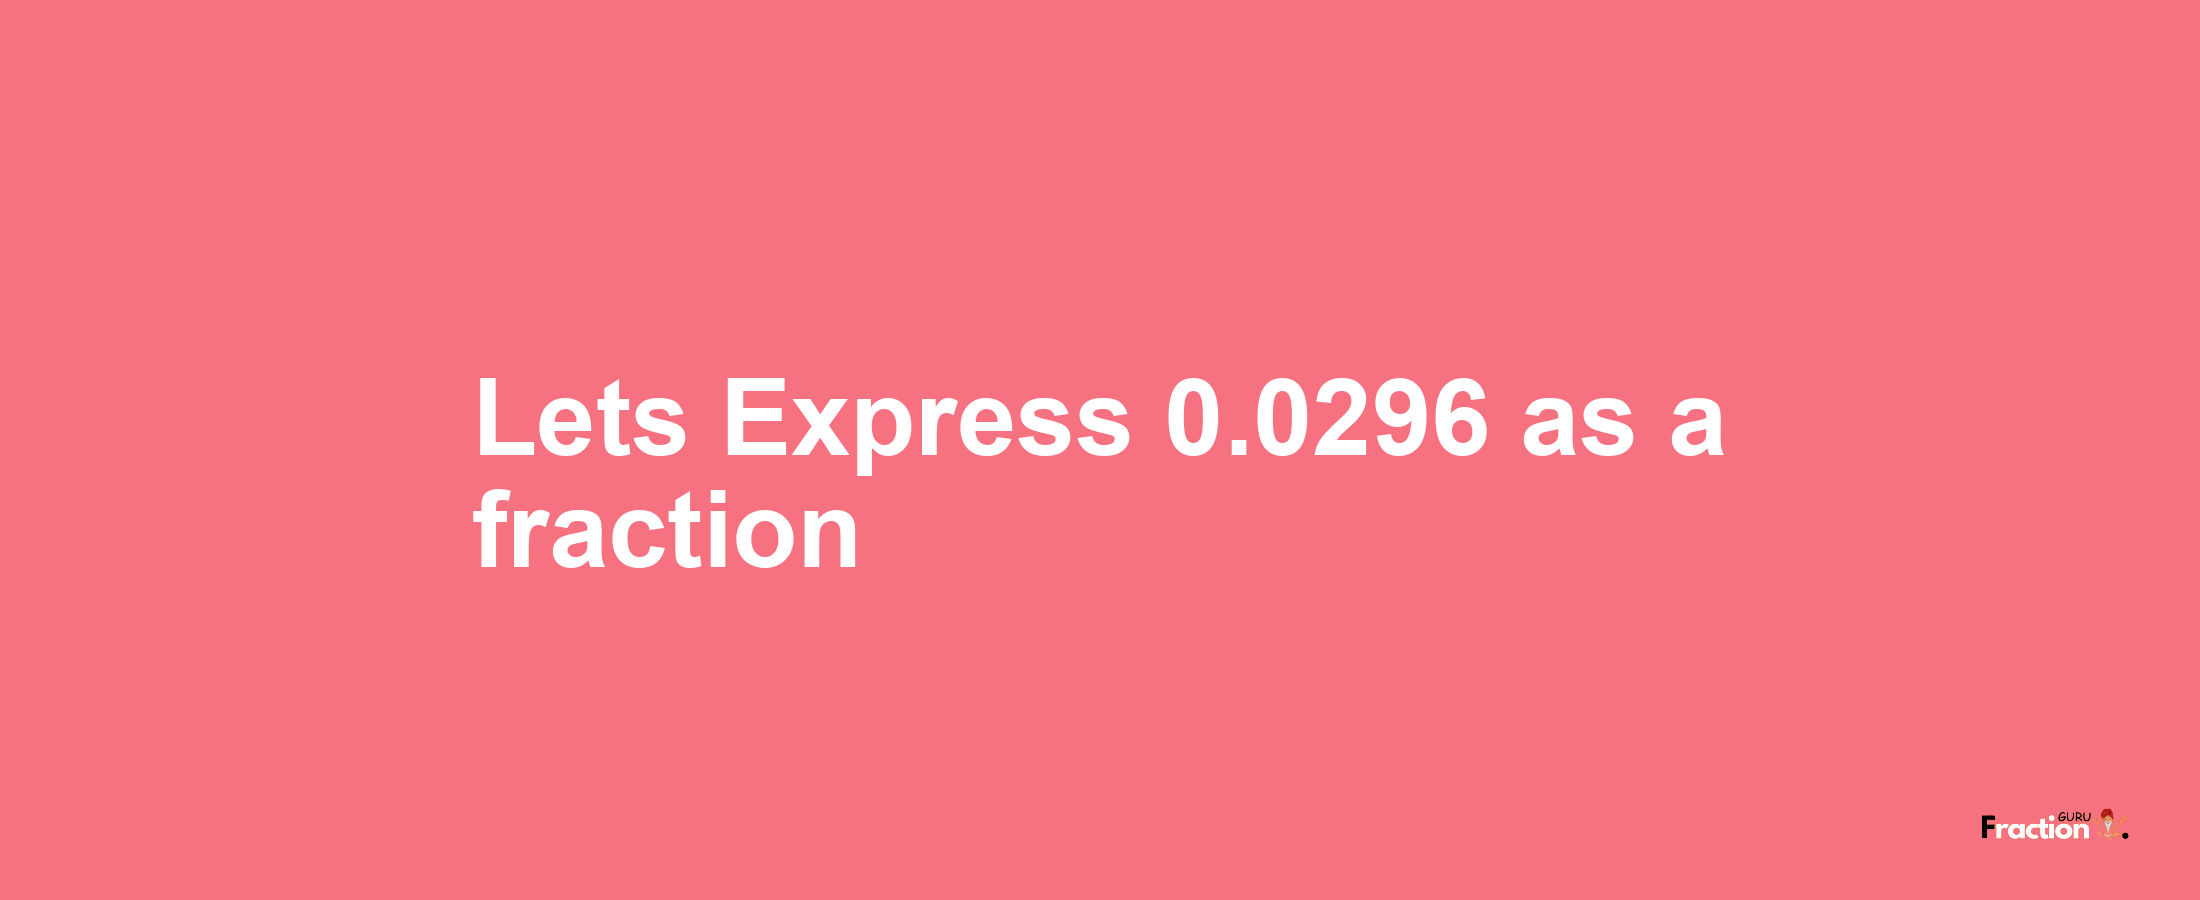 Lets Express 0.0296 as afraction